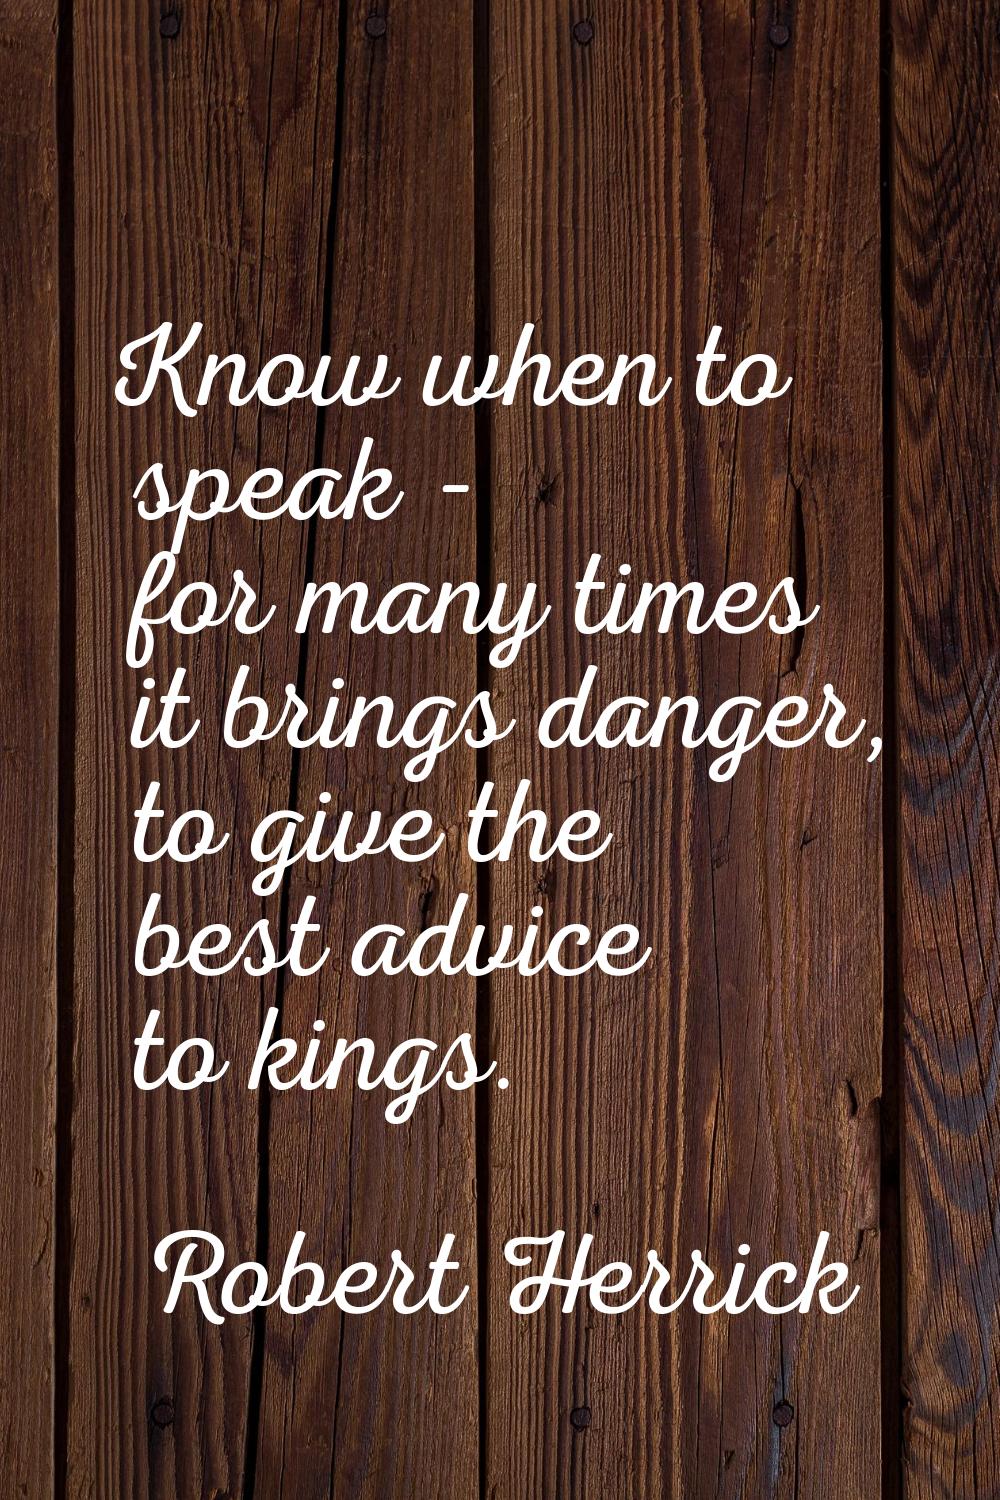 Know when to speak - for many times it brings danger, to give the best advice to kings.